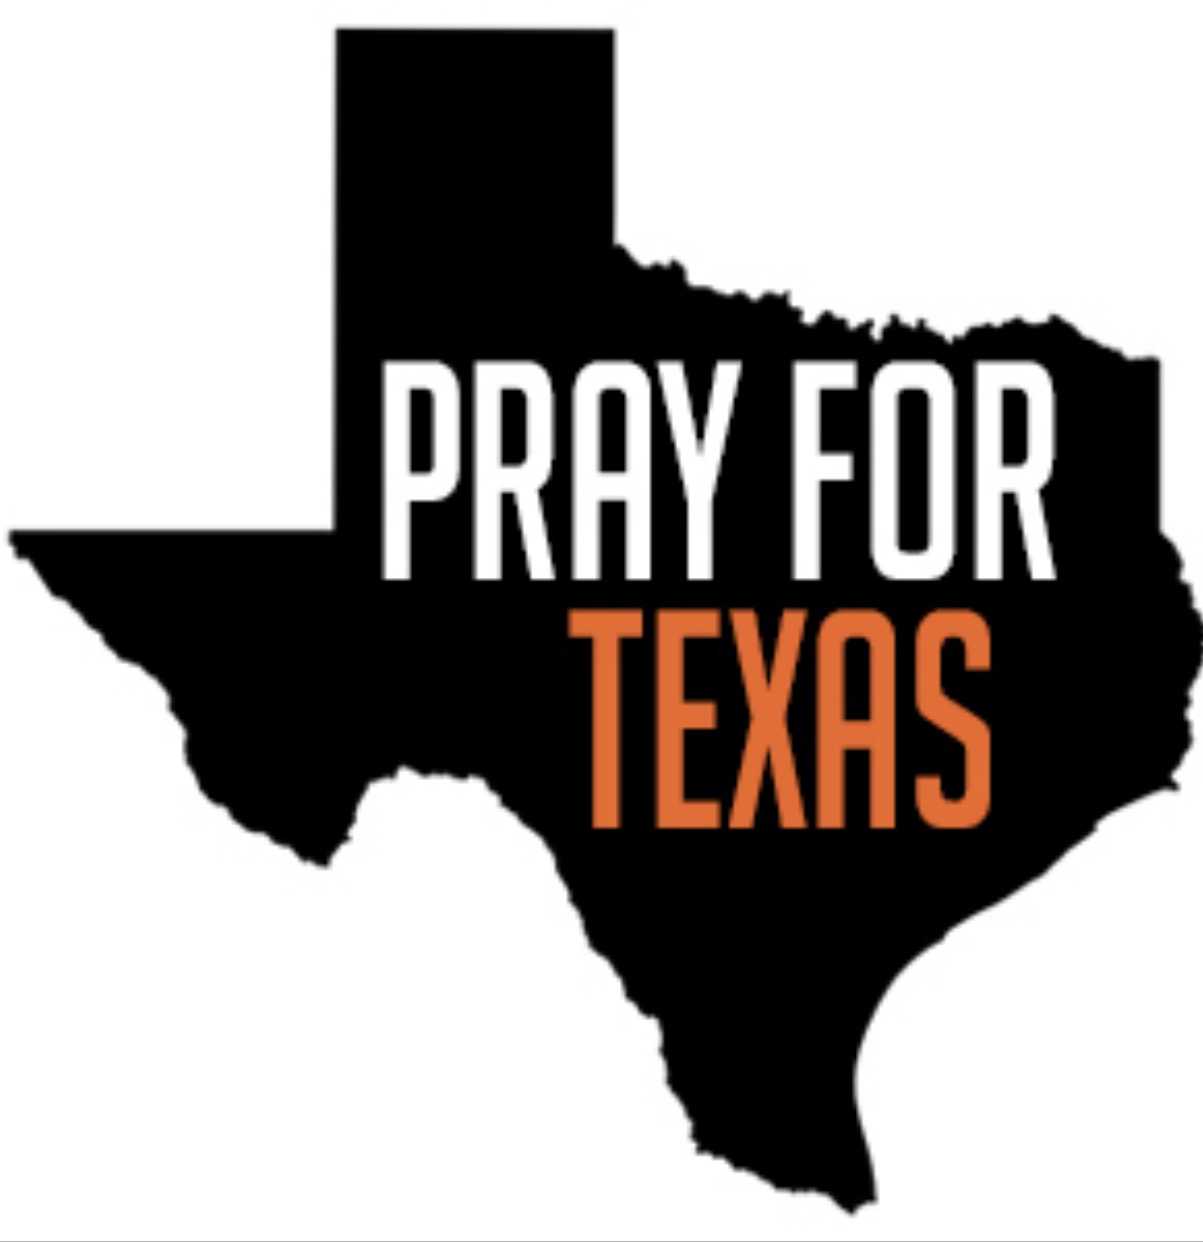 Our thoughts and prayers go out to all affected by Hurricane Harvey.